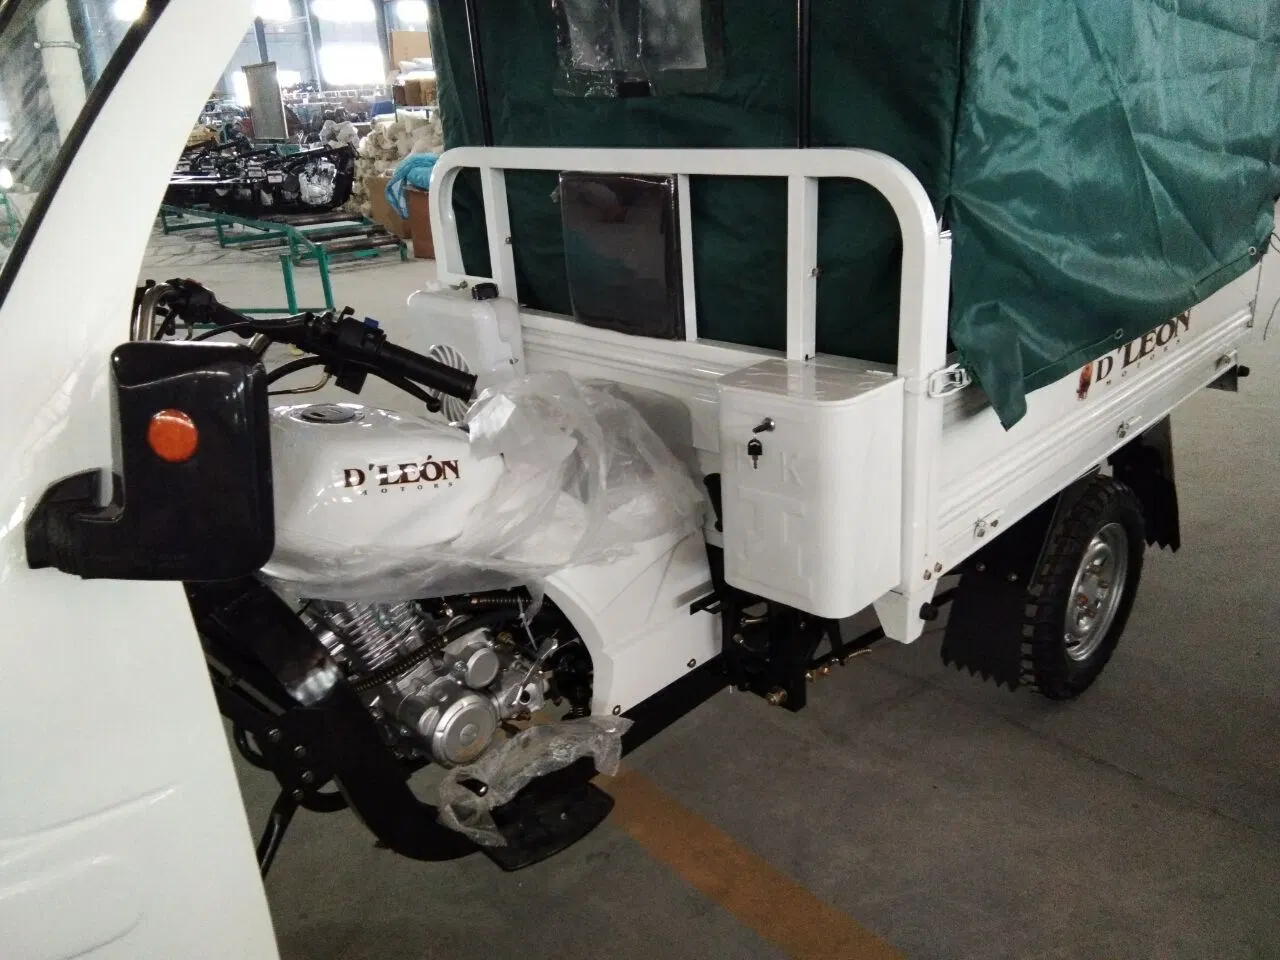 Manufacture Three Wheeled Motorcycle with Canopy Electric Cargo Tricycle Auto Rickshaw Passenger Wheel Motorcycle